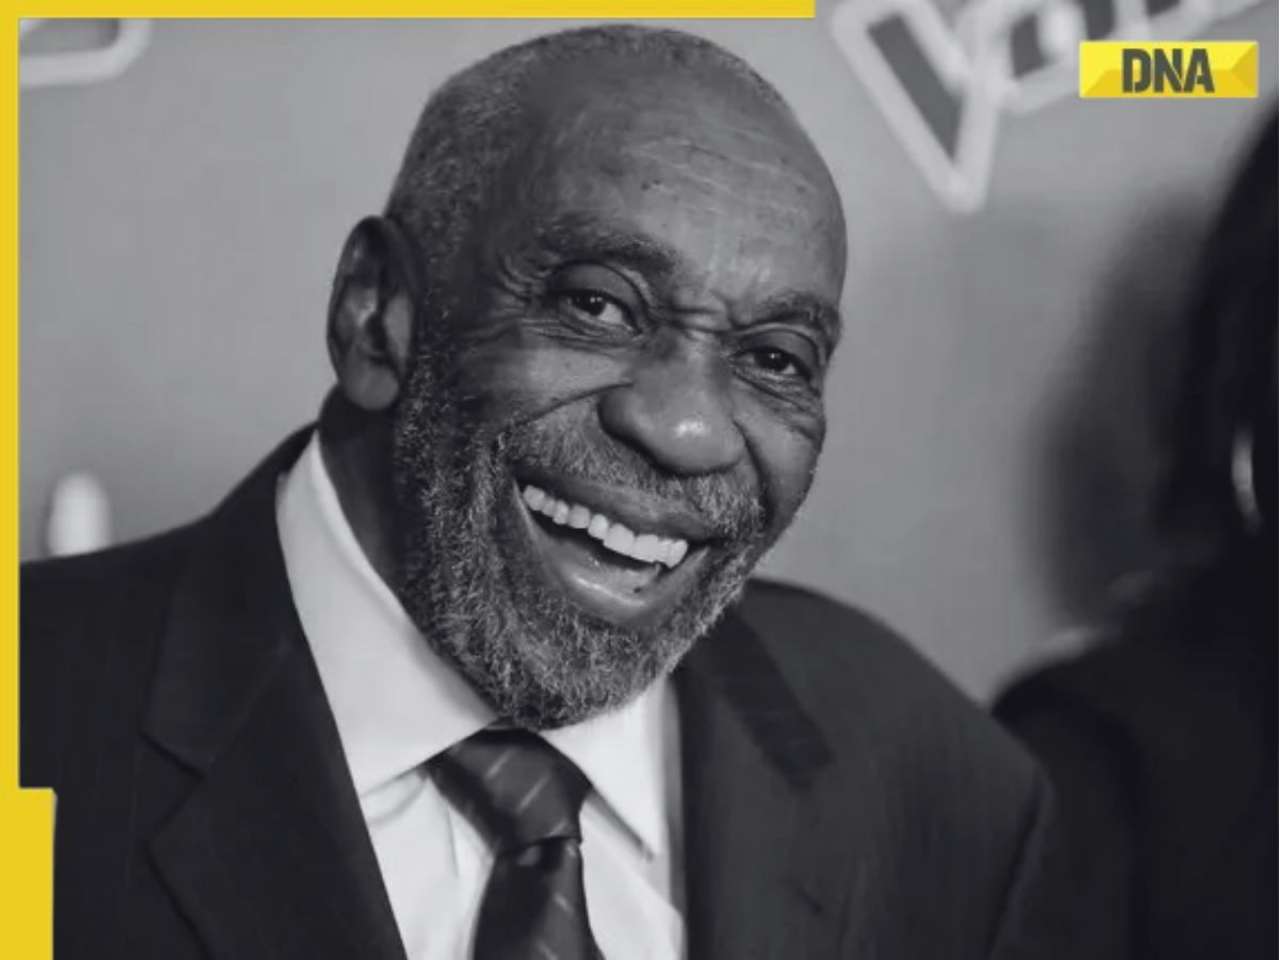 Bill Cobbs, Night at the Museum, The Bodyguard actor, passes away at 90